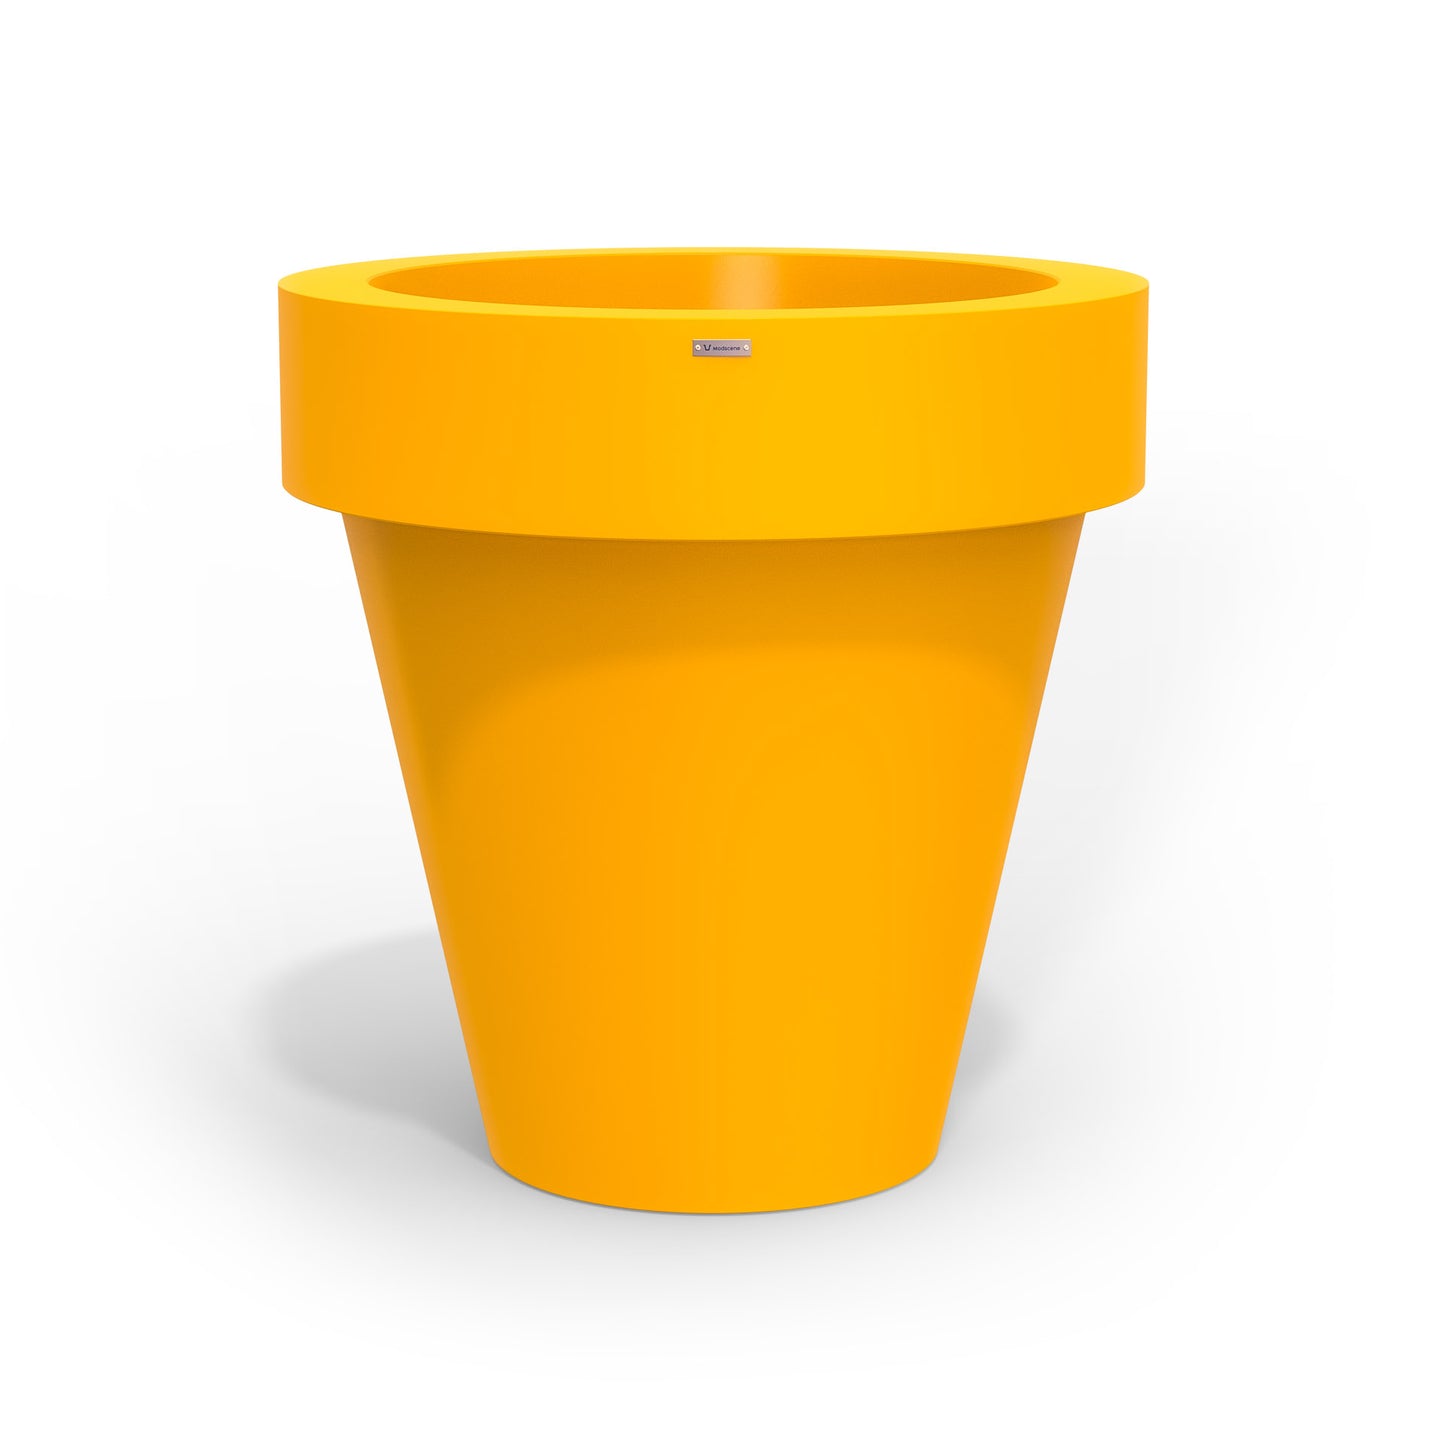 Extra large Modscene planter pot in a yellow colour. NZ made.